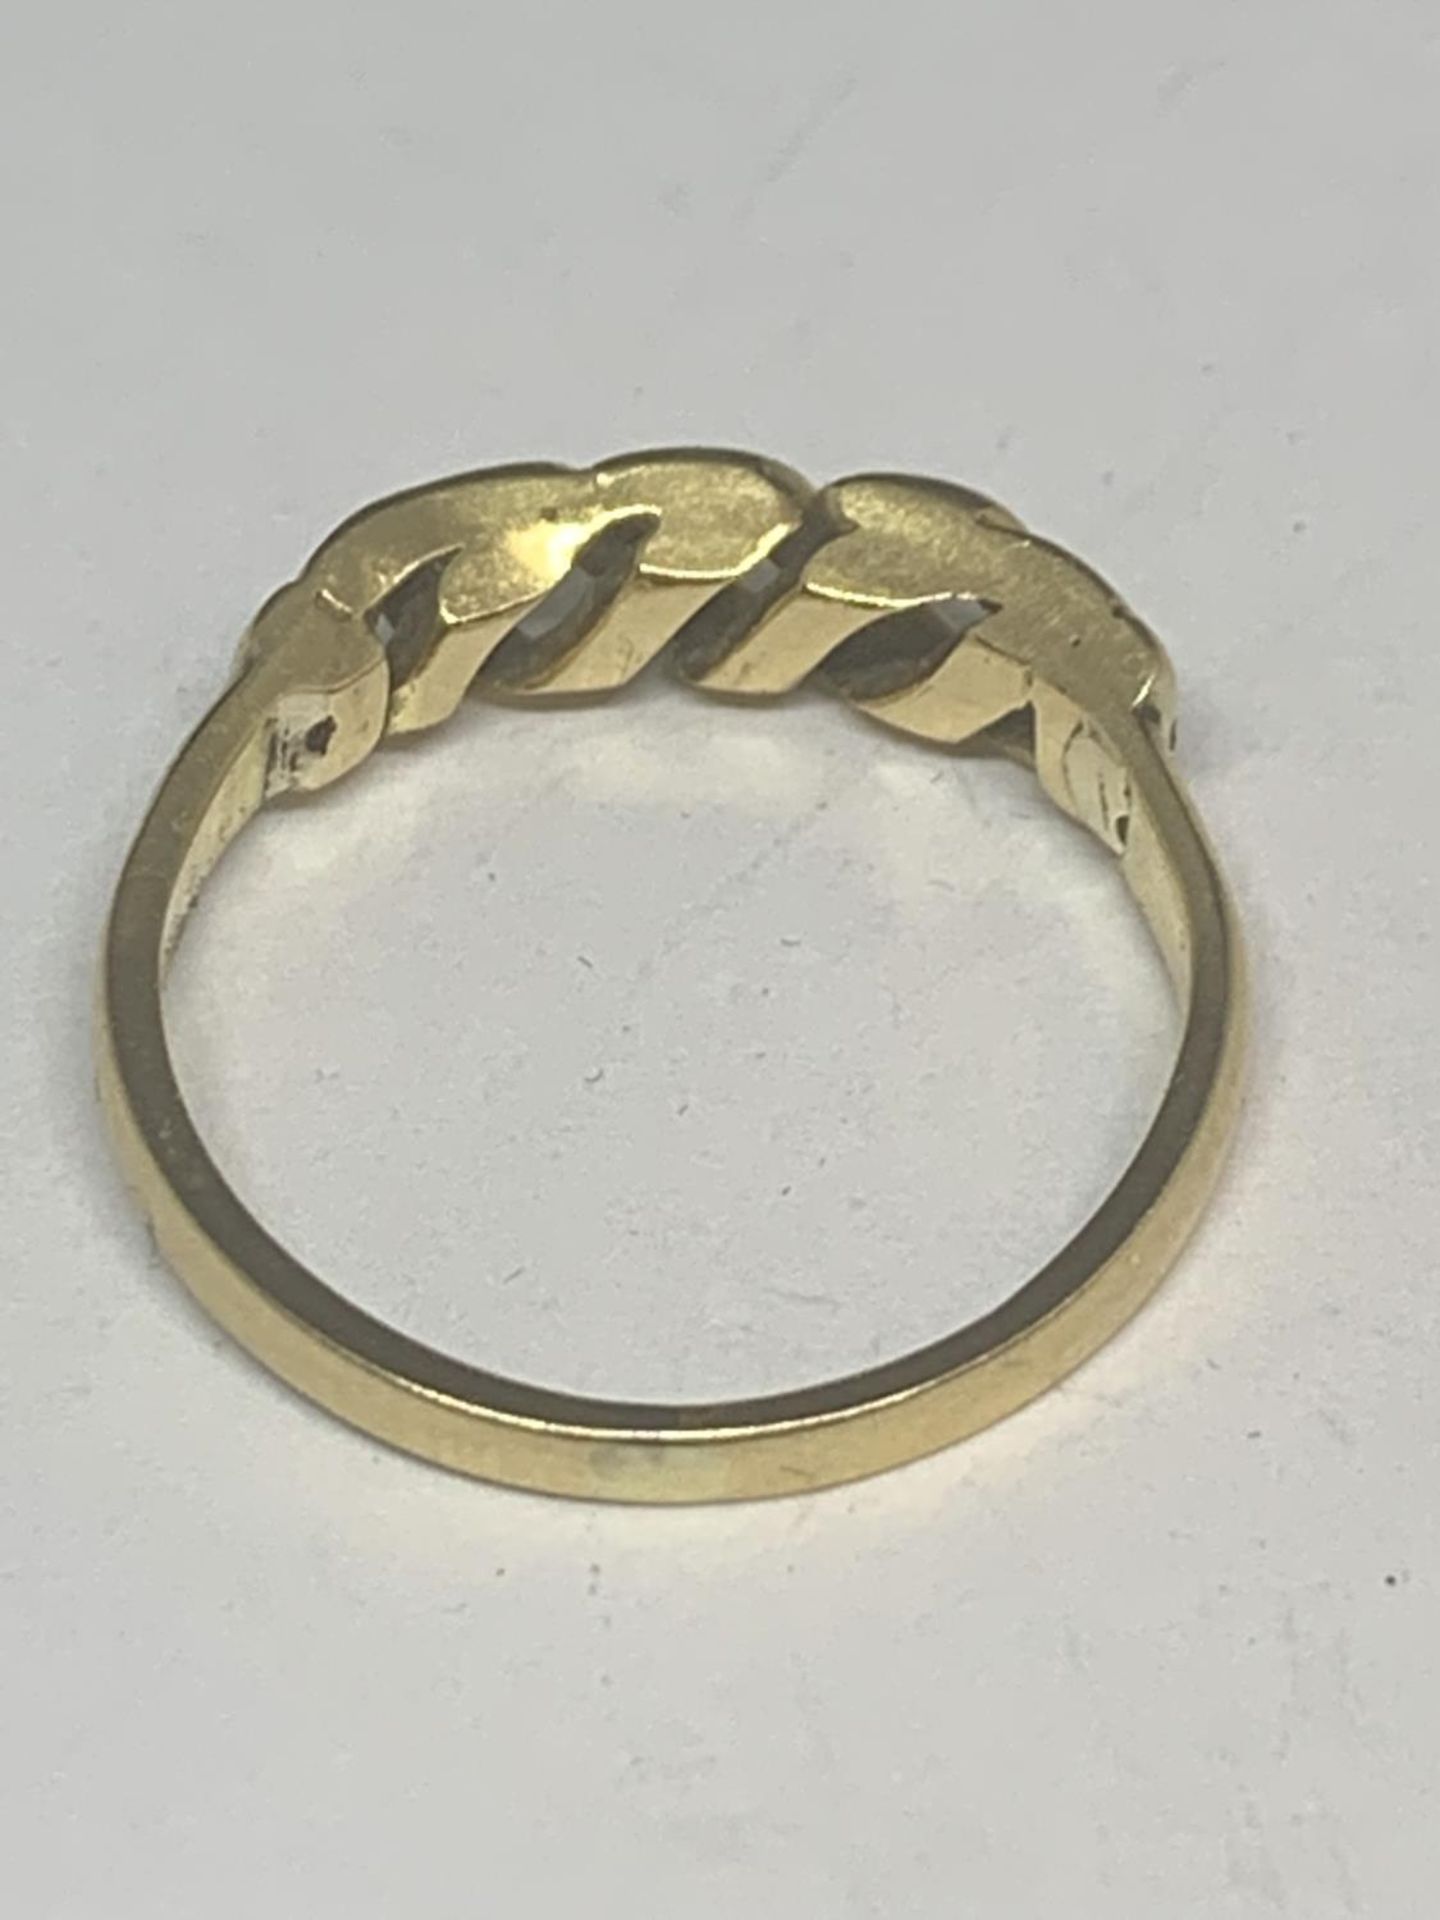 AN 18 CARAT GOLD RING WITH TWIST DESIGN GROSS WEIGHT 3.16 GRAMS SIZE N - Image 6 of 8